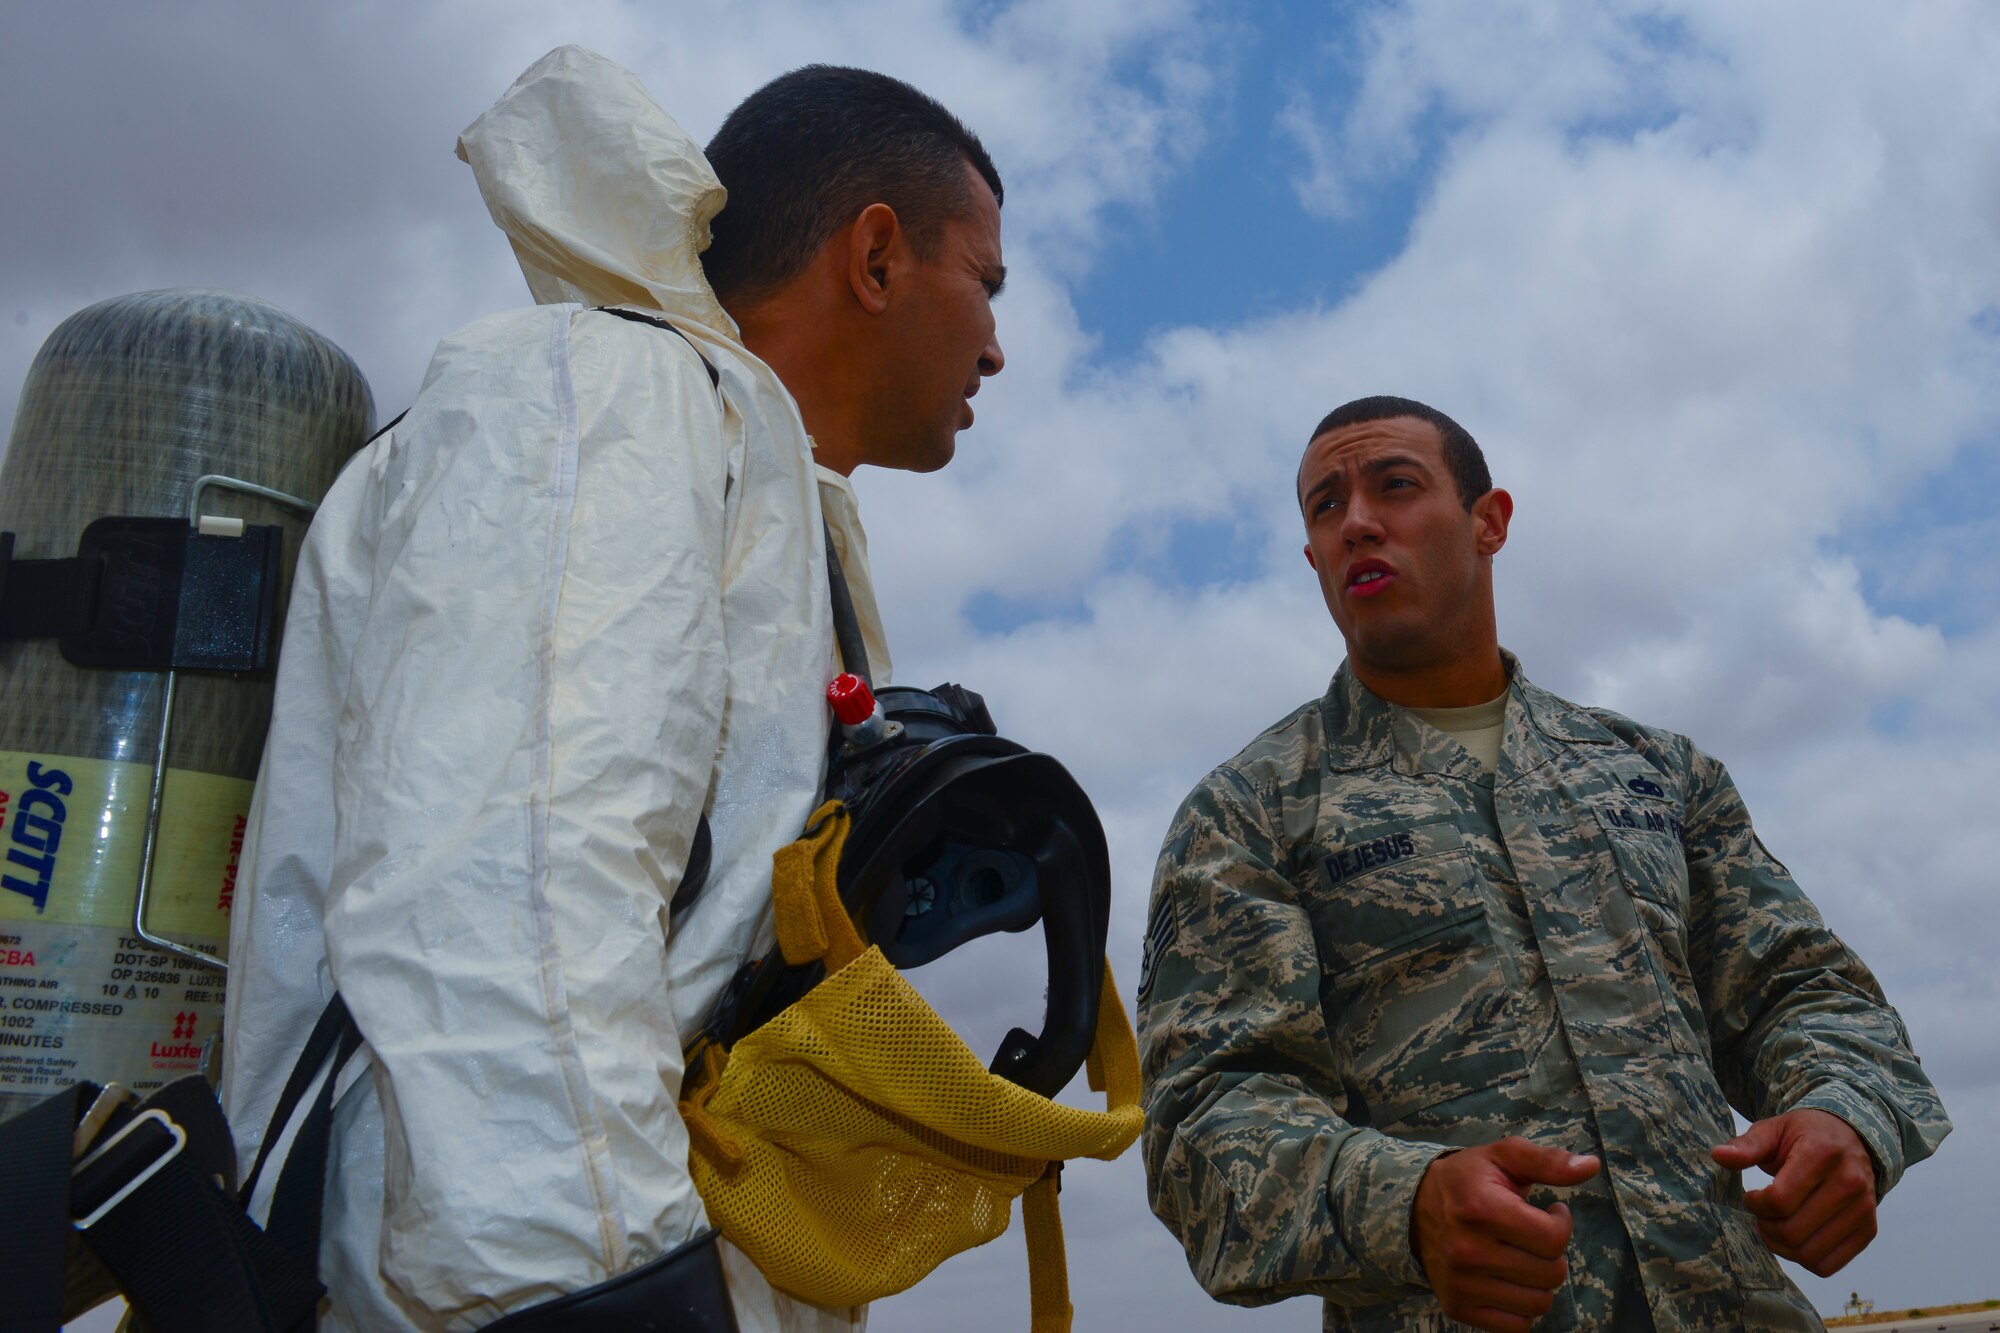 A Royal Moroccan Airman and Staff Sgt. David Dejesus, 52nd Component Maintenance Squadron aircraft fuel system repair craftsman, share expertise during a hydrazine aircraft exercise at Ben Guerir Air Base, Morocco, May 19, 2015. The exercise is part of African Lion 15. African Lion includes U.S. and Royal Moroccan Air Force F-16 pilots as well as Air National Guard and Air Force Reserve Airmen. Exercise African Lion is a U.S. Marine Corps led event with participation from the U.S. Army, German Armed Forces, British Armed Forces, Netherlands, Belgium, Senegal and Tunisia. (U.S. Air Force photo by Staff Sgt. Eboni Reams)